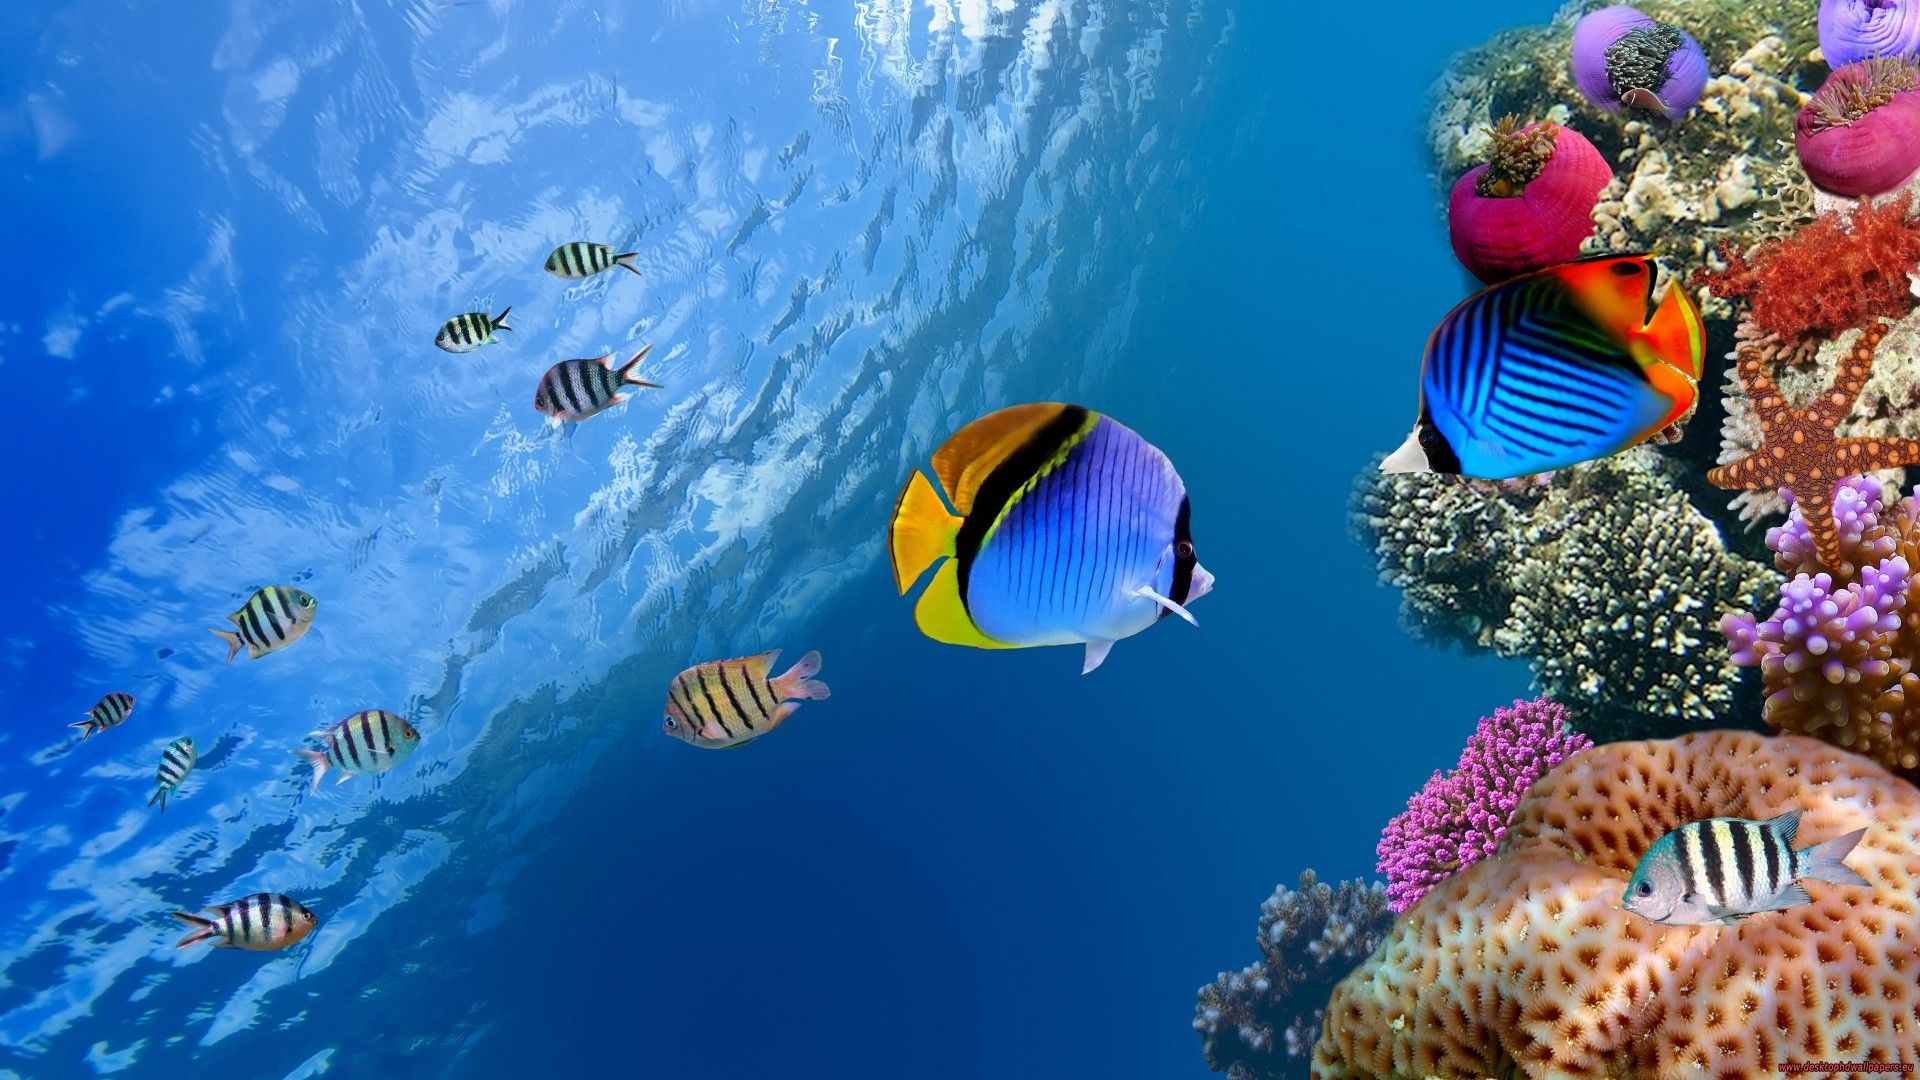 Wallpaper, water, nature, photo manipulation, underwater, coral reef, 1920x1080 px, computer wallpaper, ecosystem, biome, marine biology, organism, coral reef fish, pomacentridae, anemone fish, stony coral 1920x1080